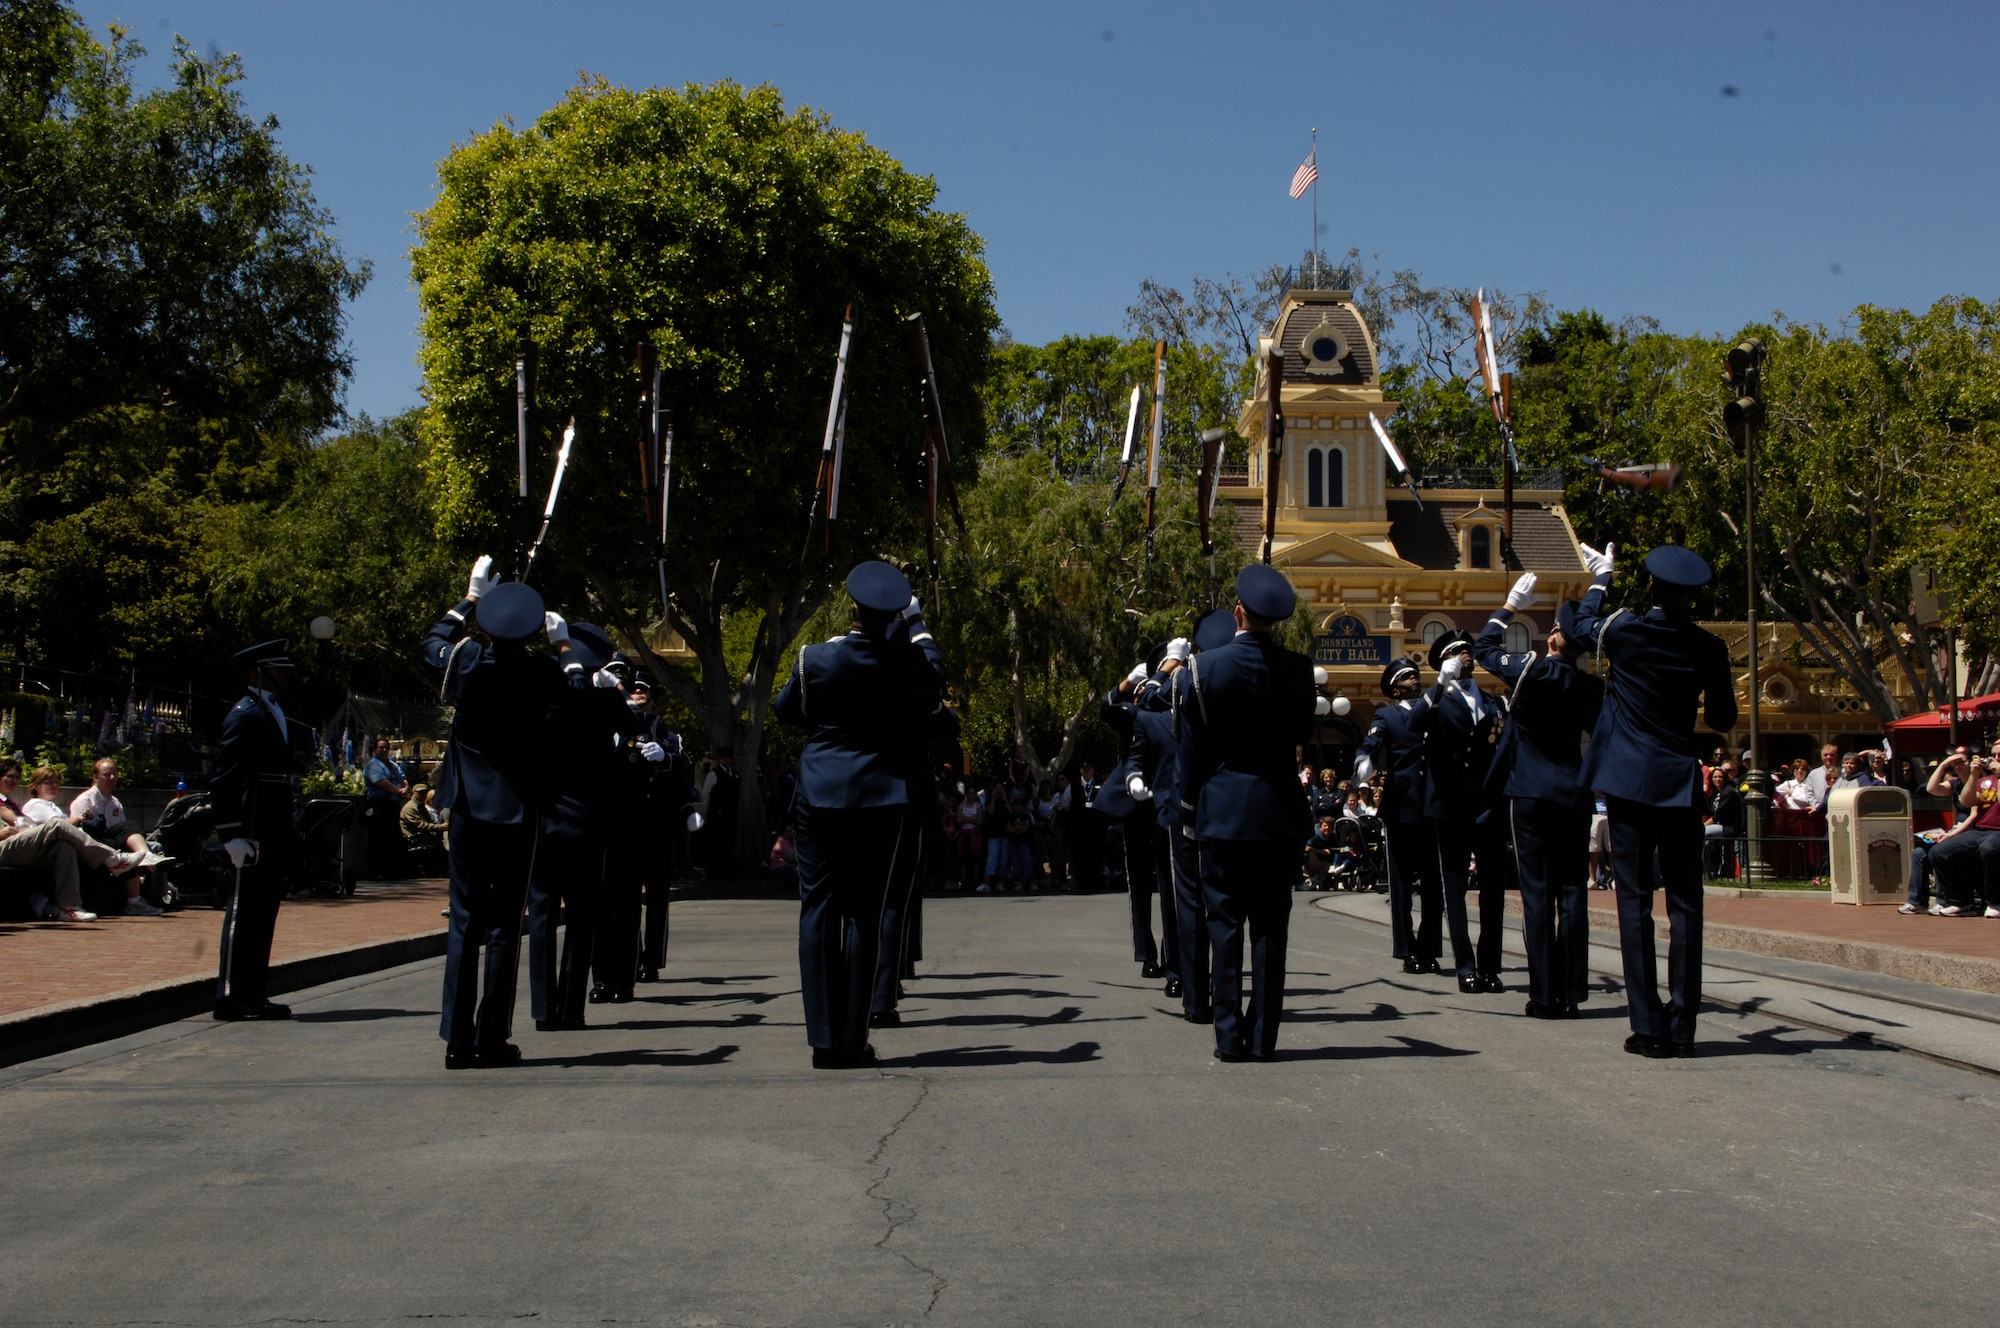 The Air Force Honor Guard Drill Team performs their newly added 'Mass Overs' maneuver where all 16 weapons are silmultaneously hurled in the air during their 16 Man drill performance at Disneyland Resort in Aneheim, Calif., 18 April 2007. The Drill Team is the traveling component of the Air Force Honor Guard and tours Air Force bases world wide showcasing the precision of today's Air Force to recruit, retain, and inspire Airmen for the Air Force mission. (U.S. Air Force photo by Senior Airman Daniel R. DeCook)(Released)